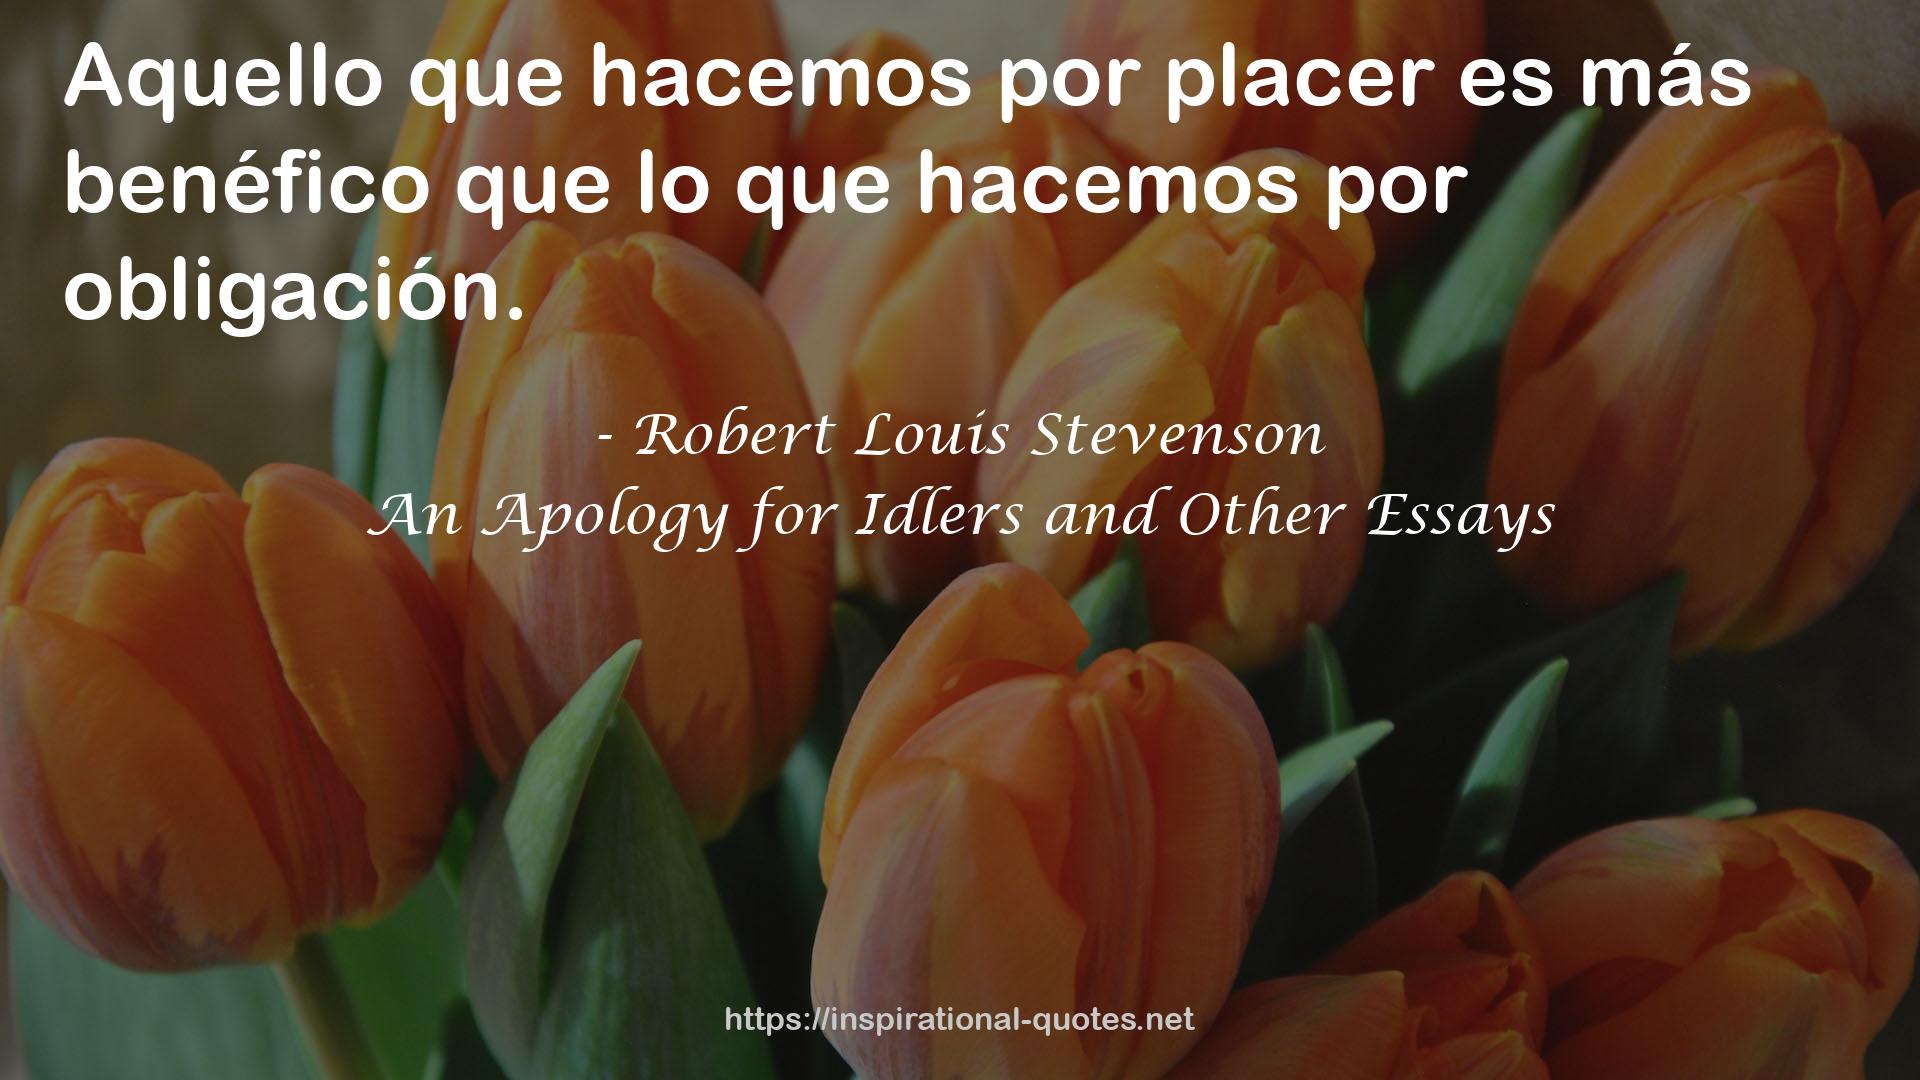 An Apology for Idlers and Other Essays QUOTES